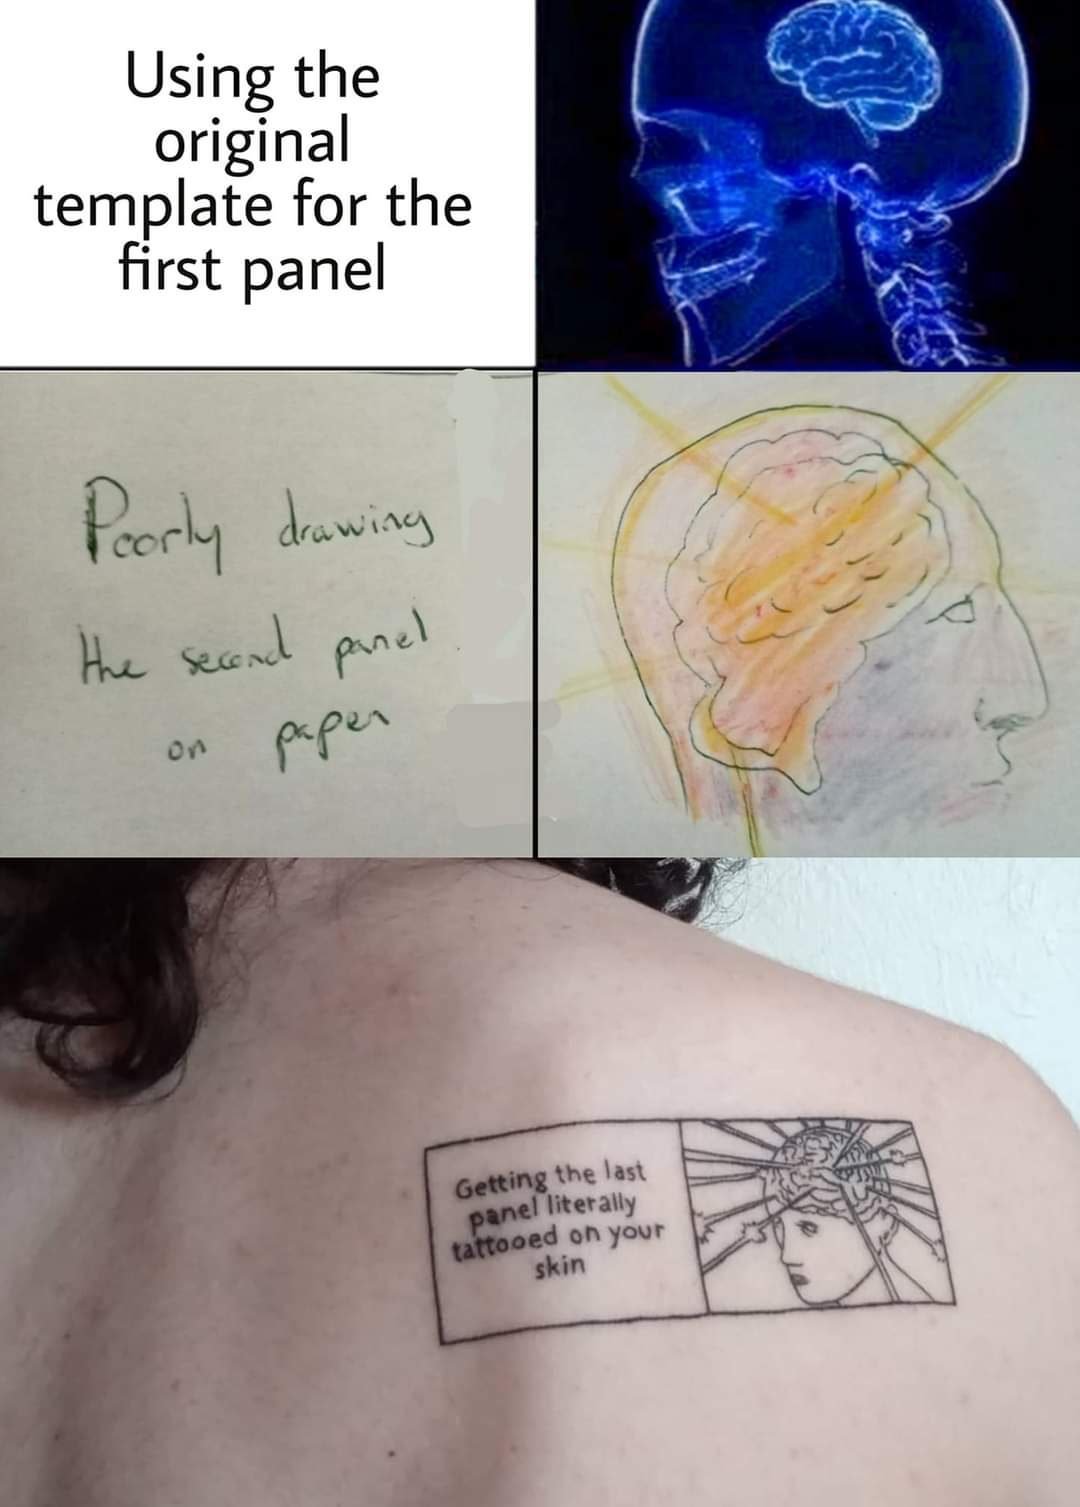 jaw - Using the original template for the first panel Poorly drawing the second panel on paper Getting the last panel literally tattooed on your skin